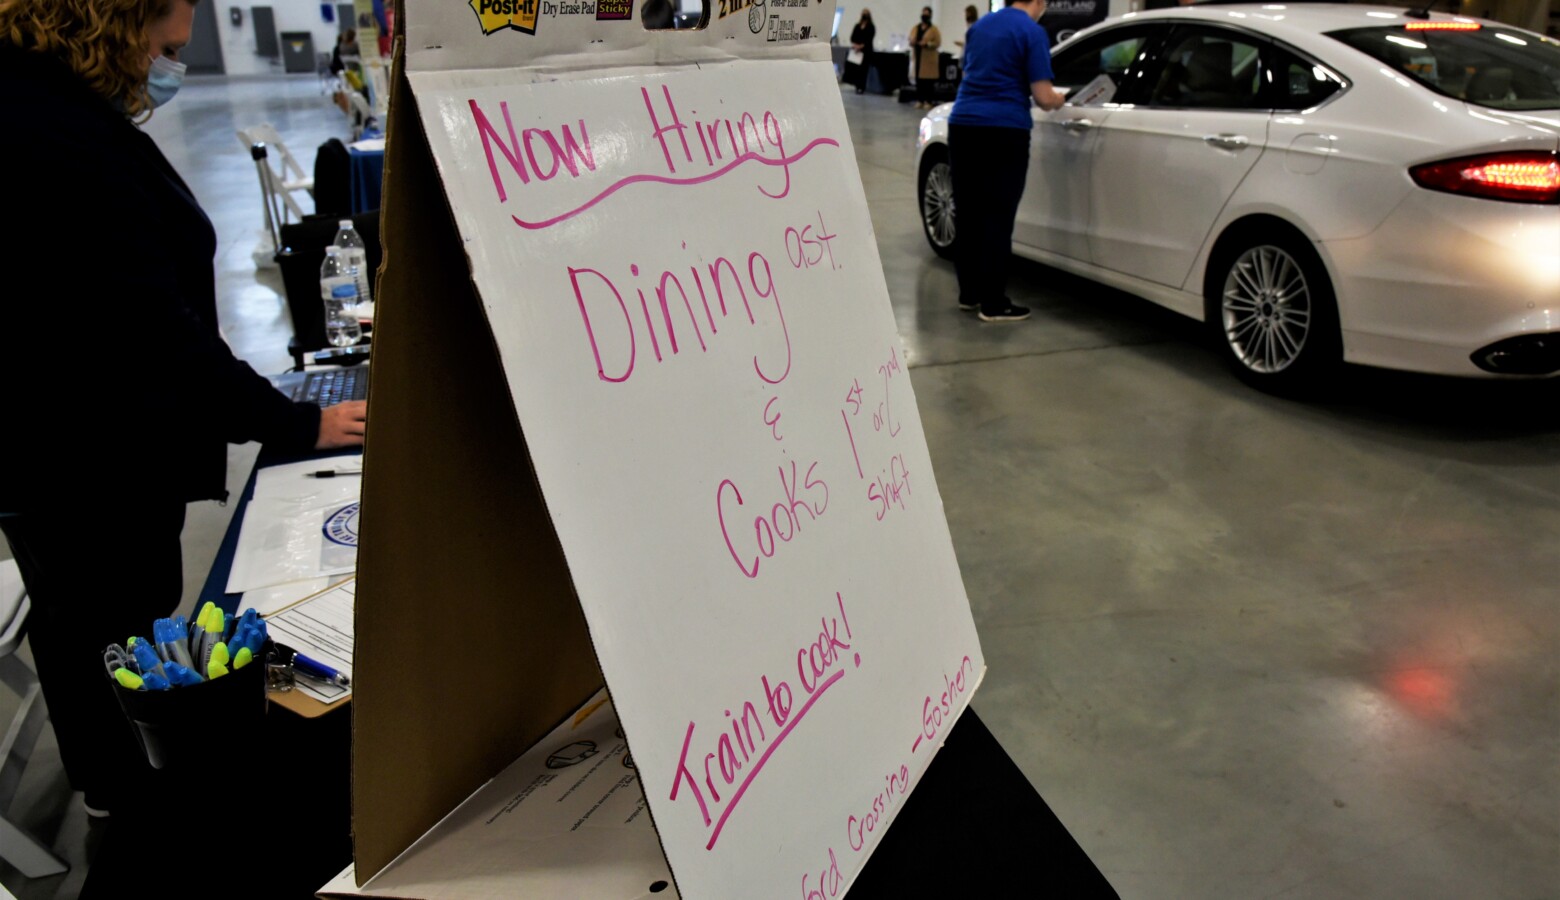 A drive-thru job fair in Elkhart to connect out of work Hoosiers with companies looking to hire employees. (Justin Hicks/IPB News)